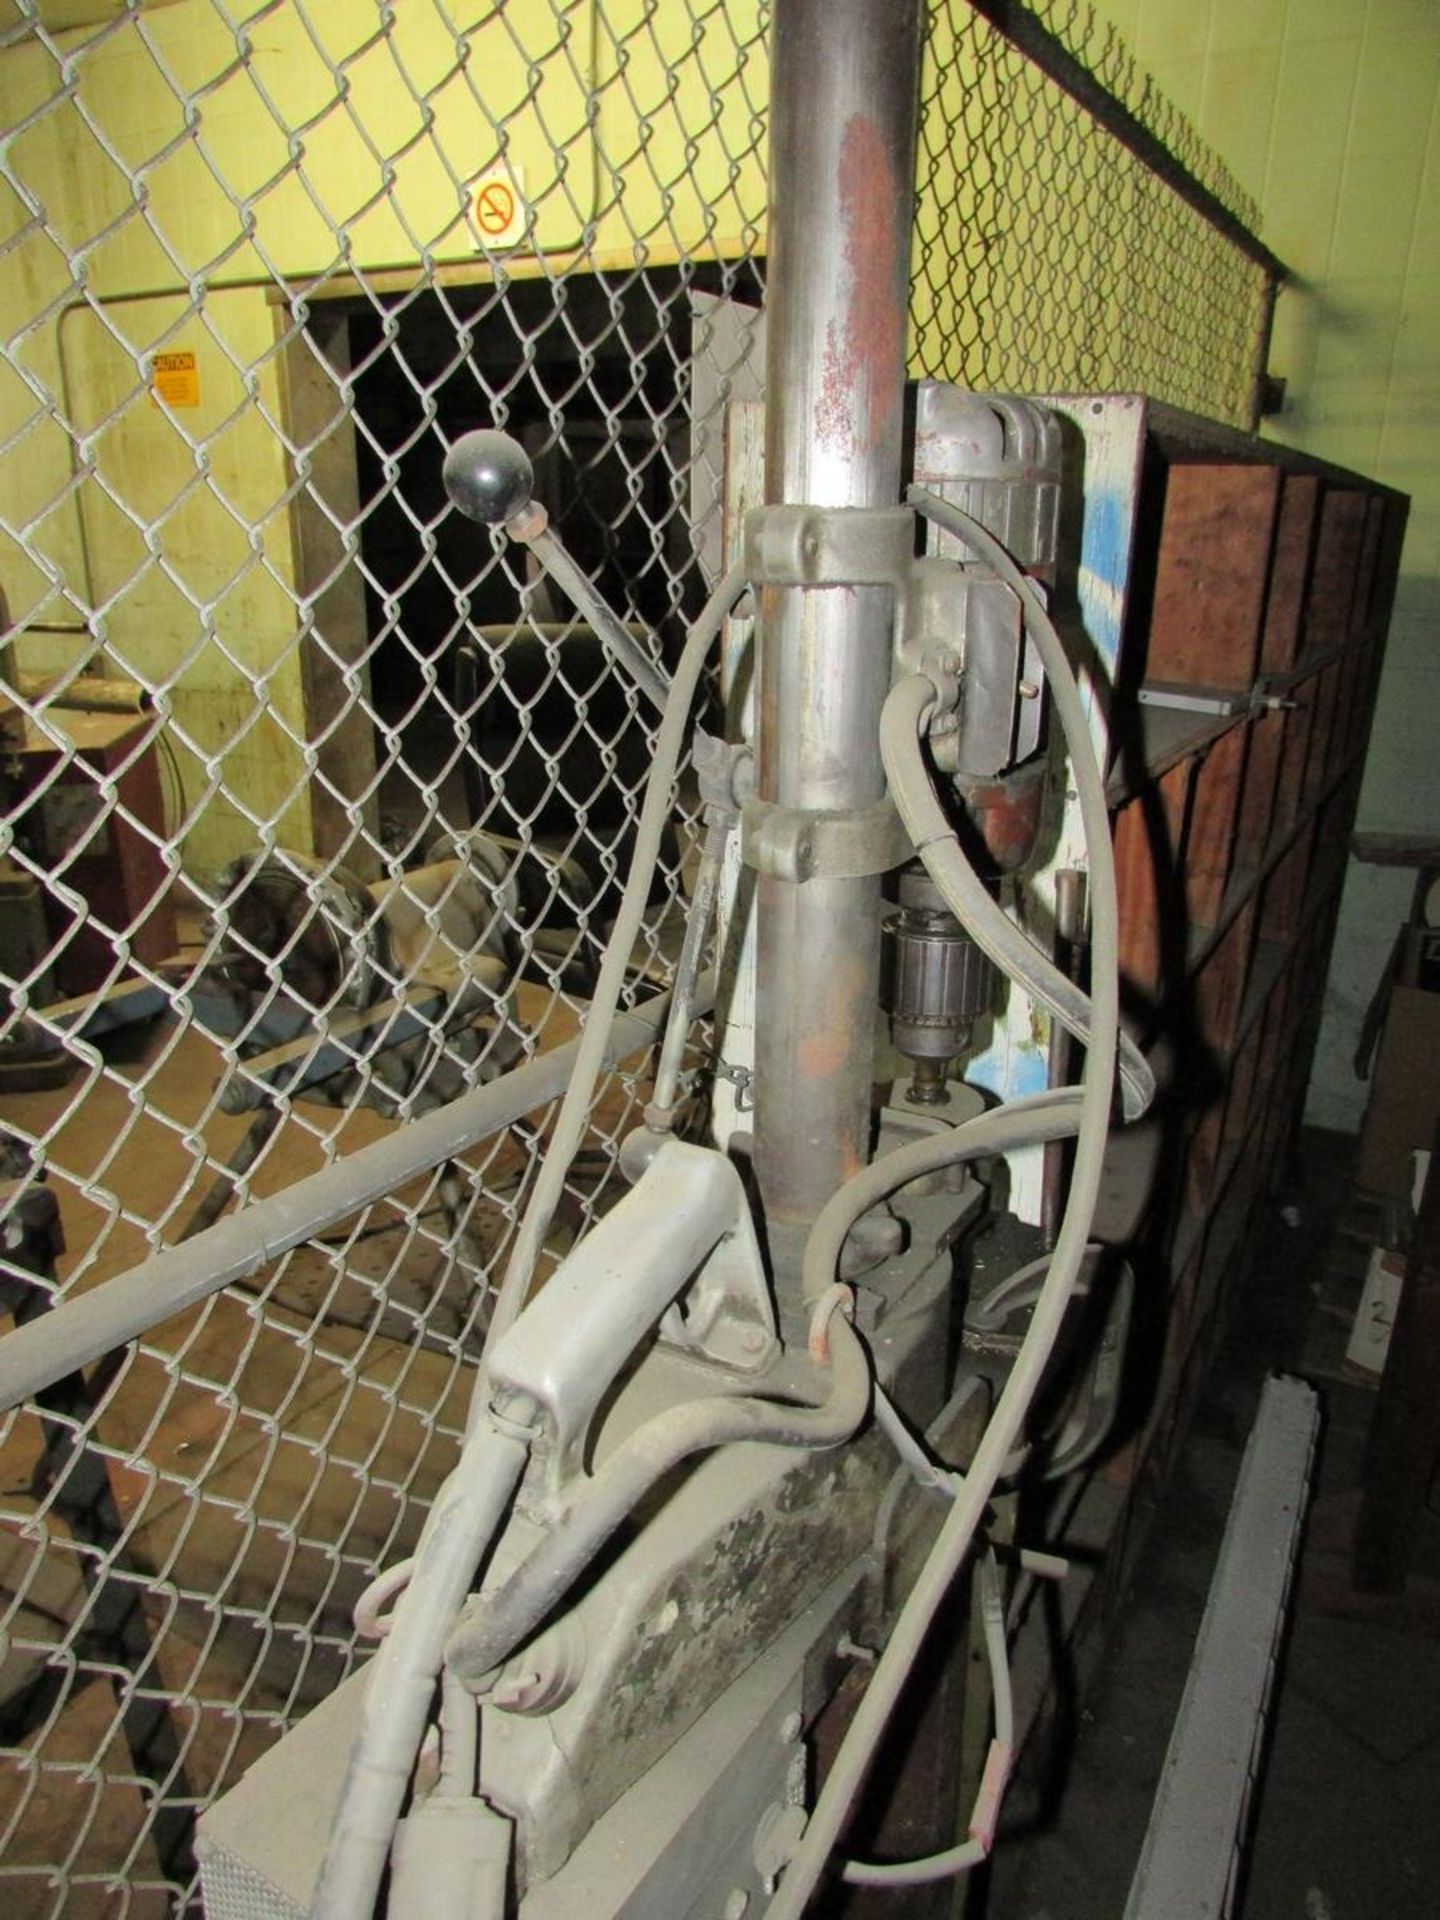 Remaining Contents of Return Cage and Prep Room, To Include Assorted Copper Pipe, PVC Pipe, Lockers, - Image 13 of 15